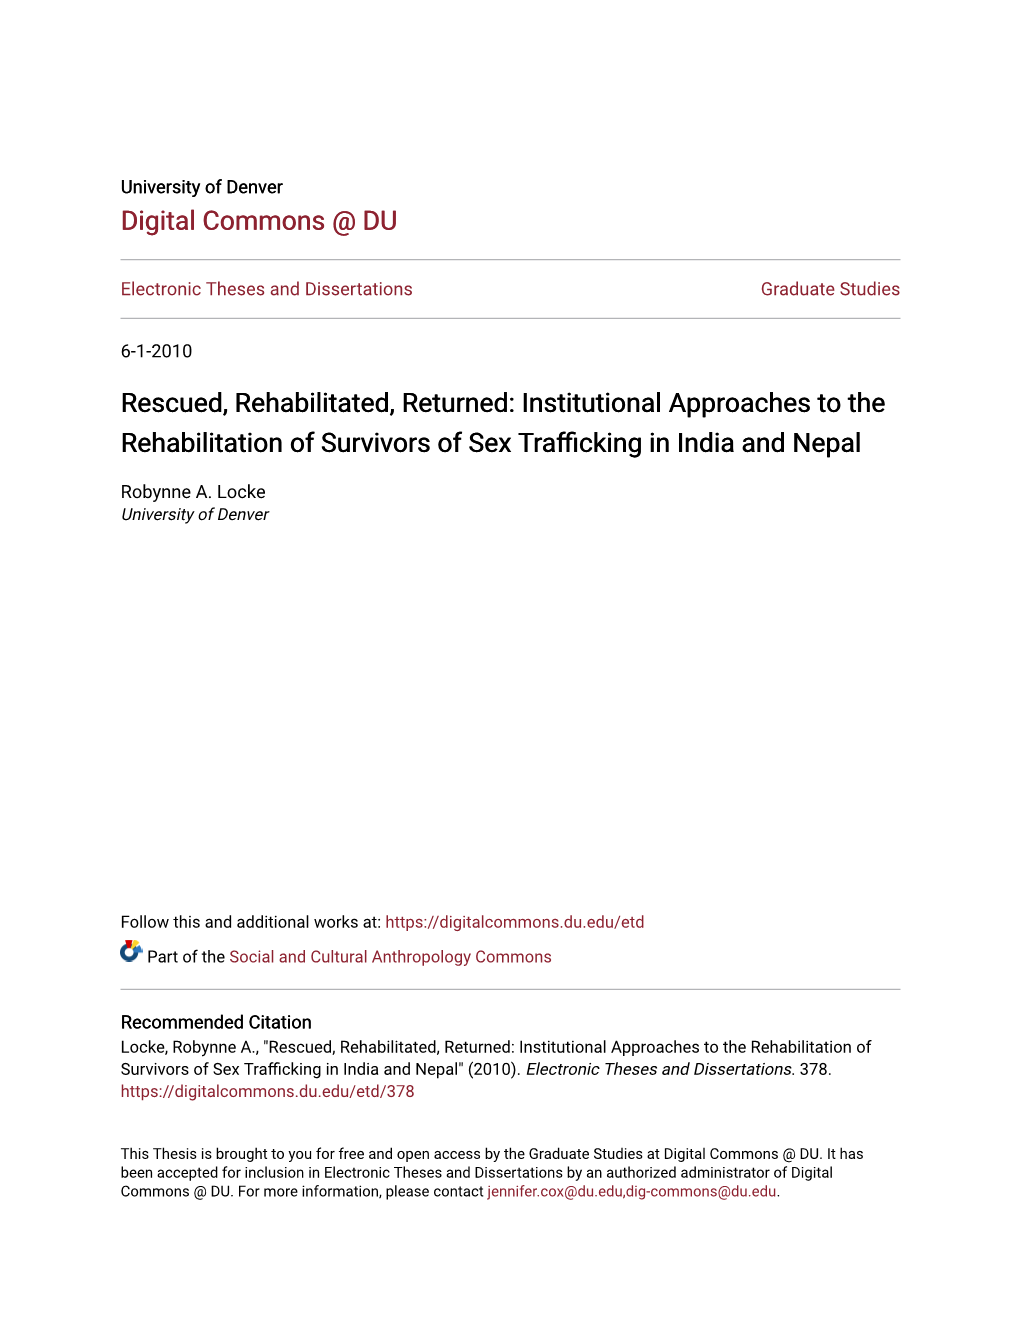 Institutional Approaches to the Rehabilitation of Survivors of Sex Trafficking in India and Nepal